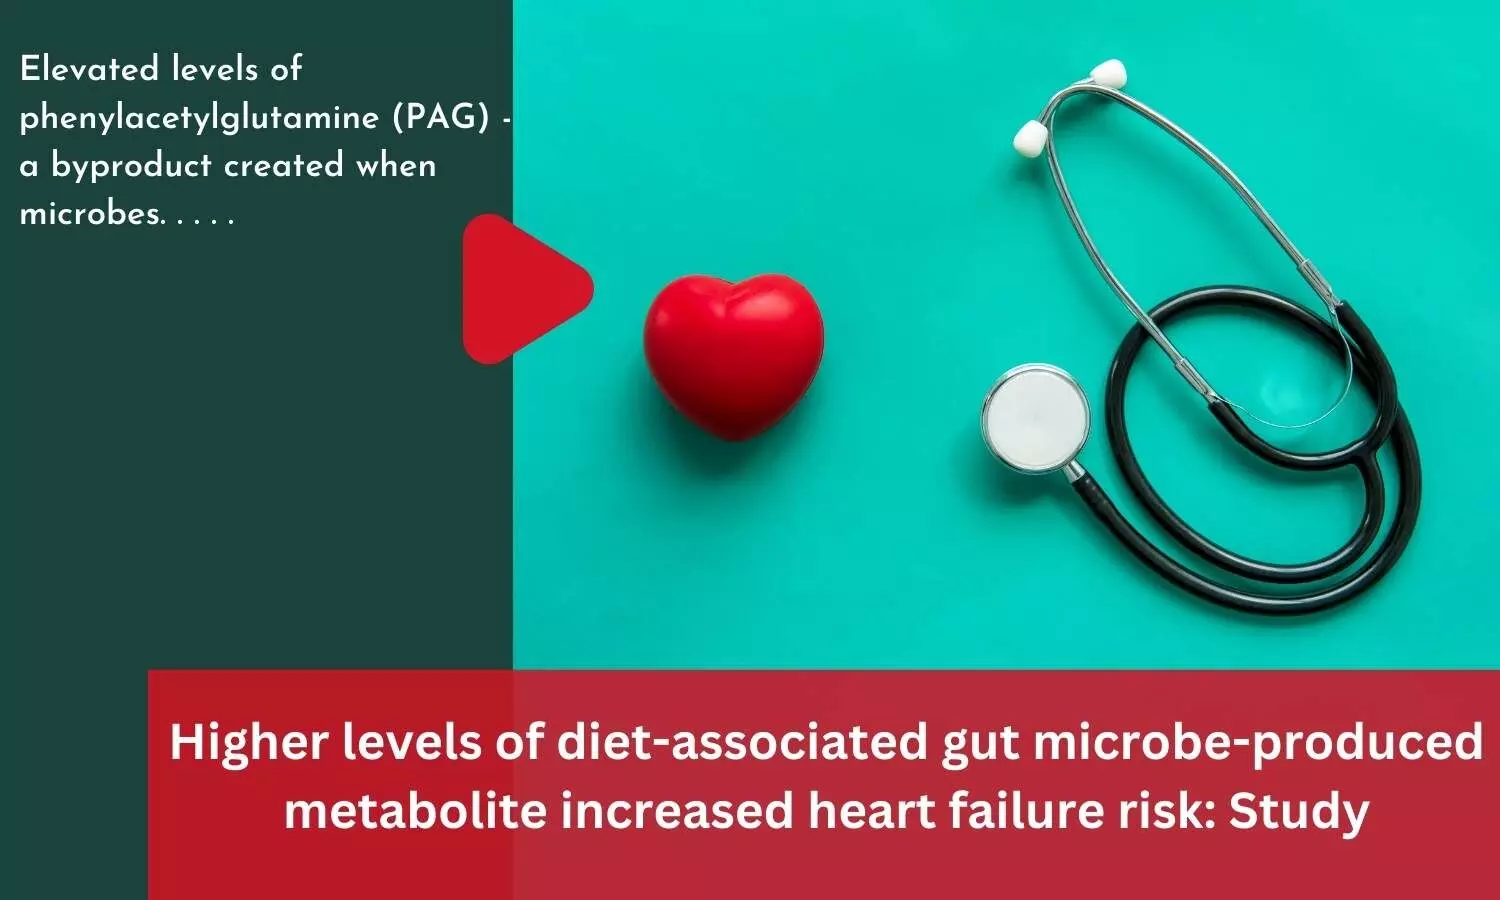 Higher levels of diet-associated gut microbe-produced metabolite increased heart failure risk: Study